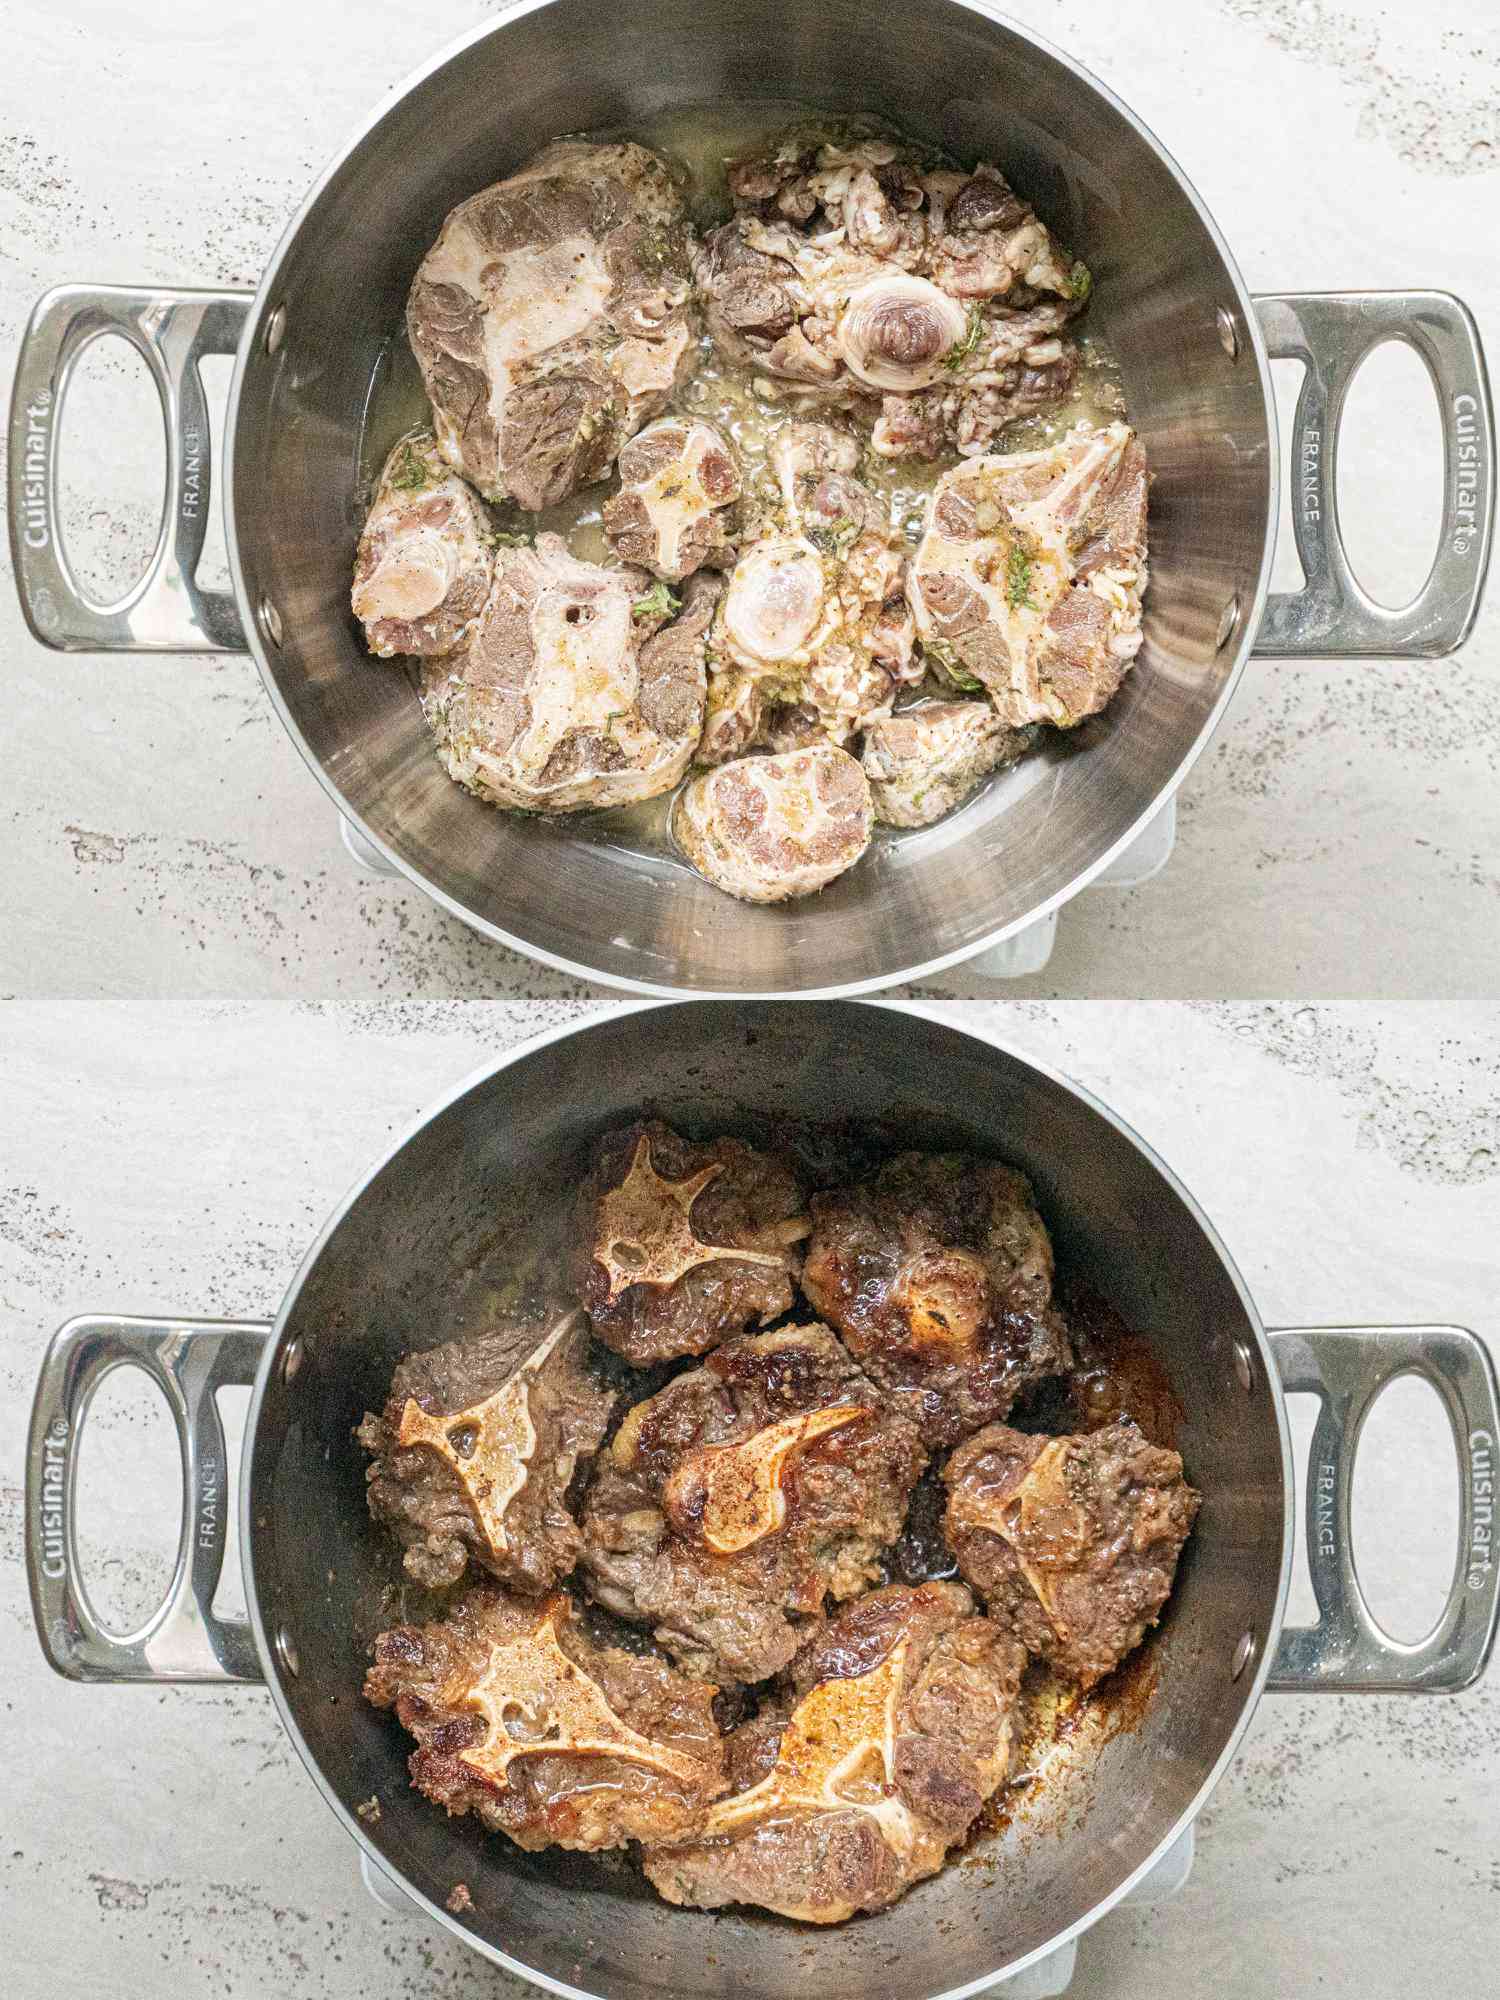 Two image collage of oxtail browning in pot